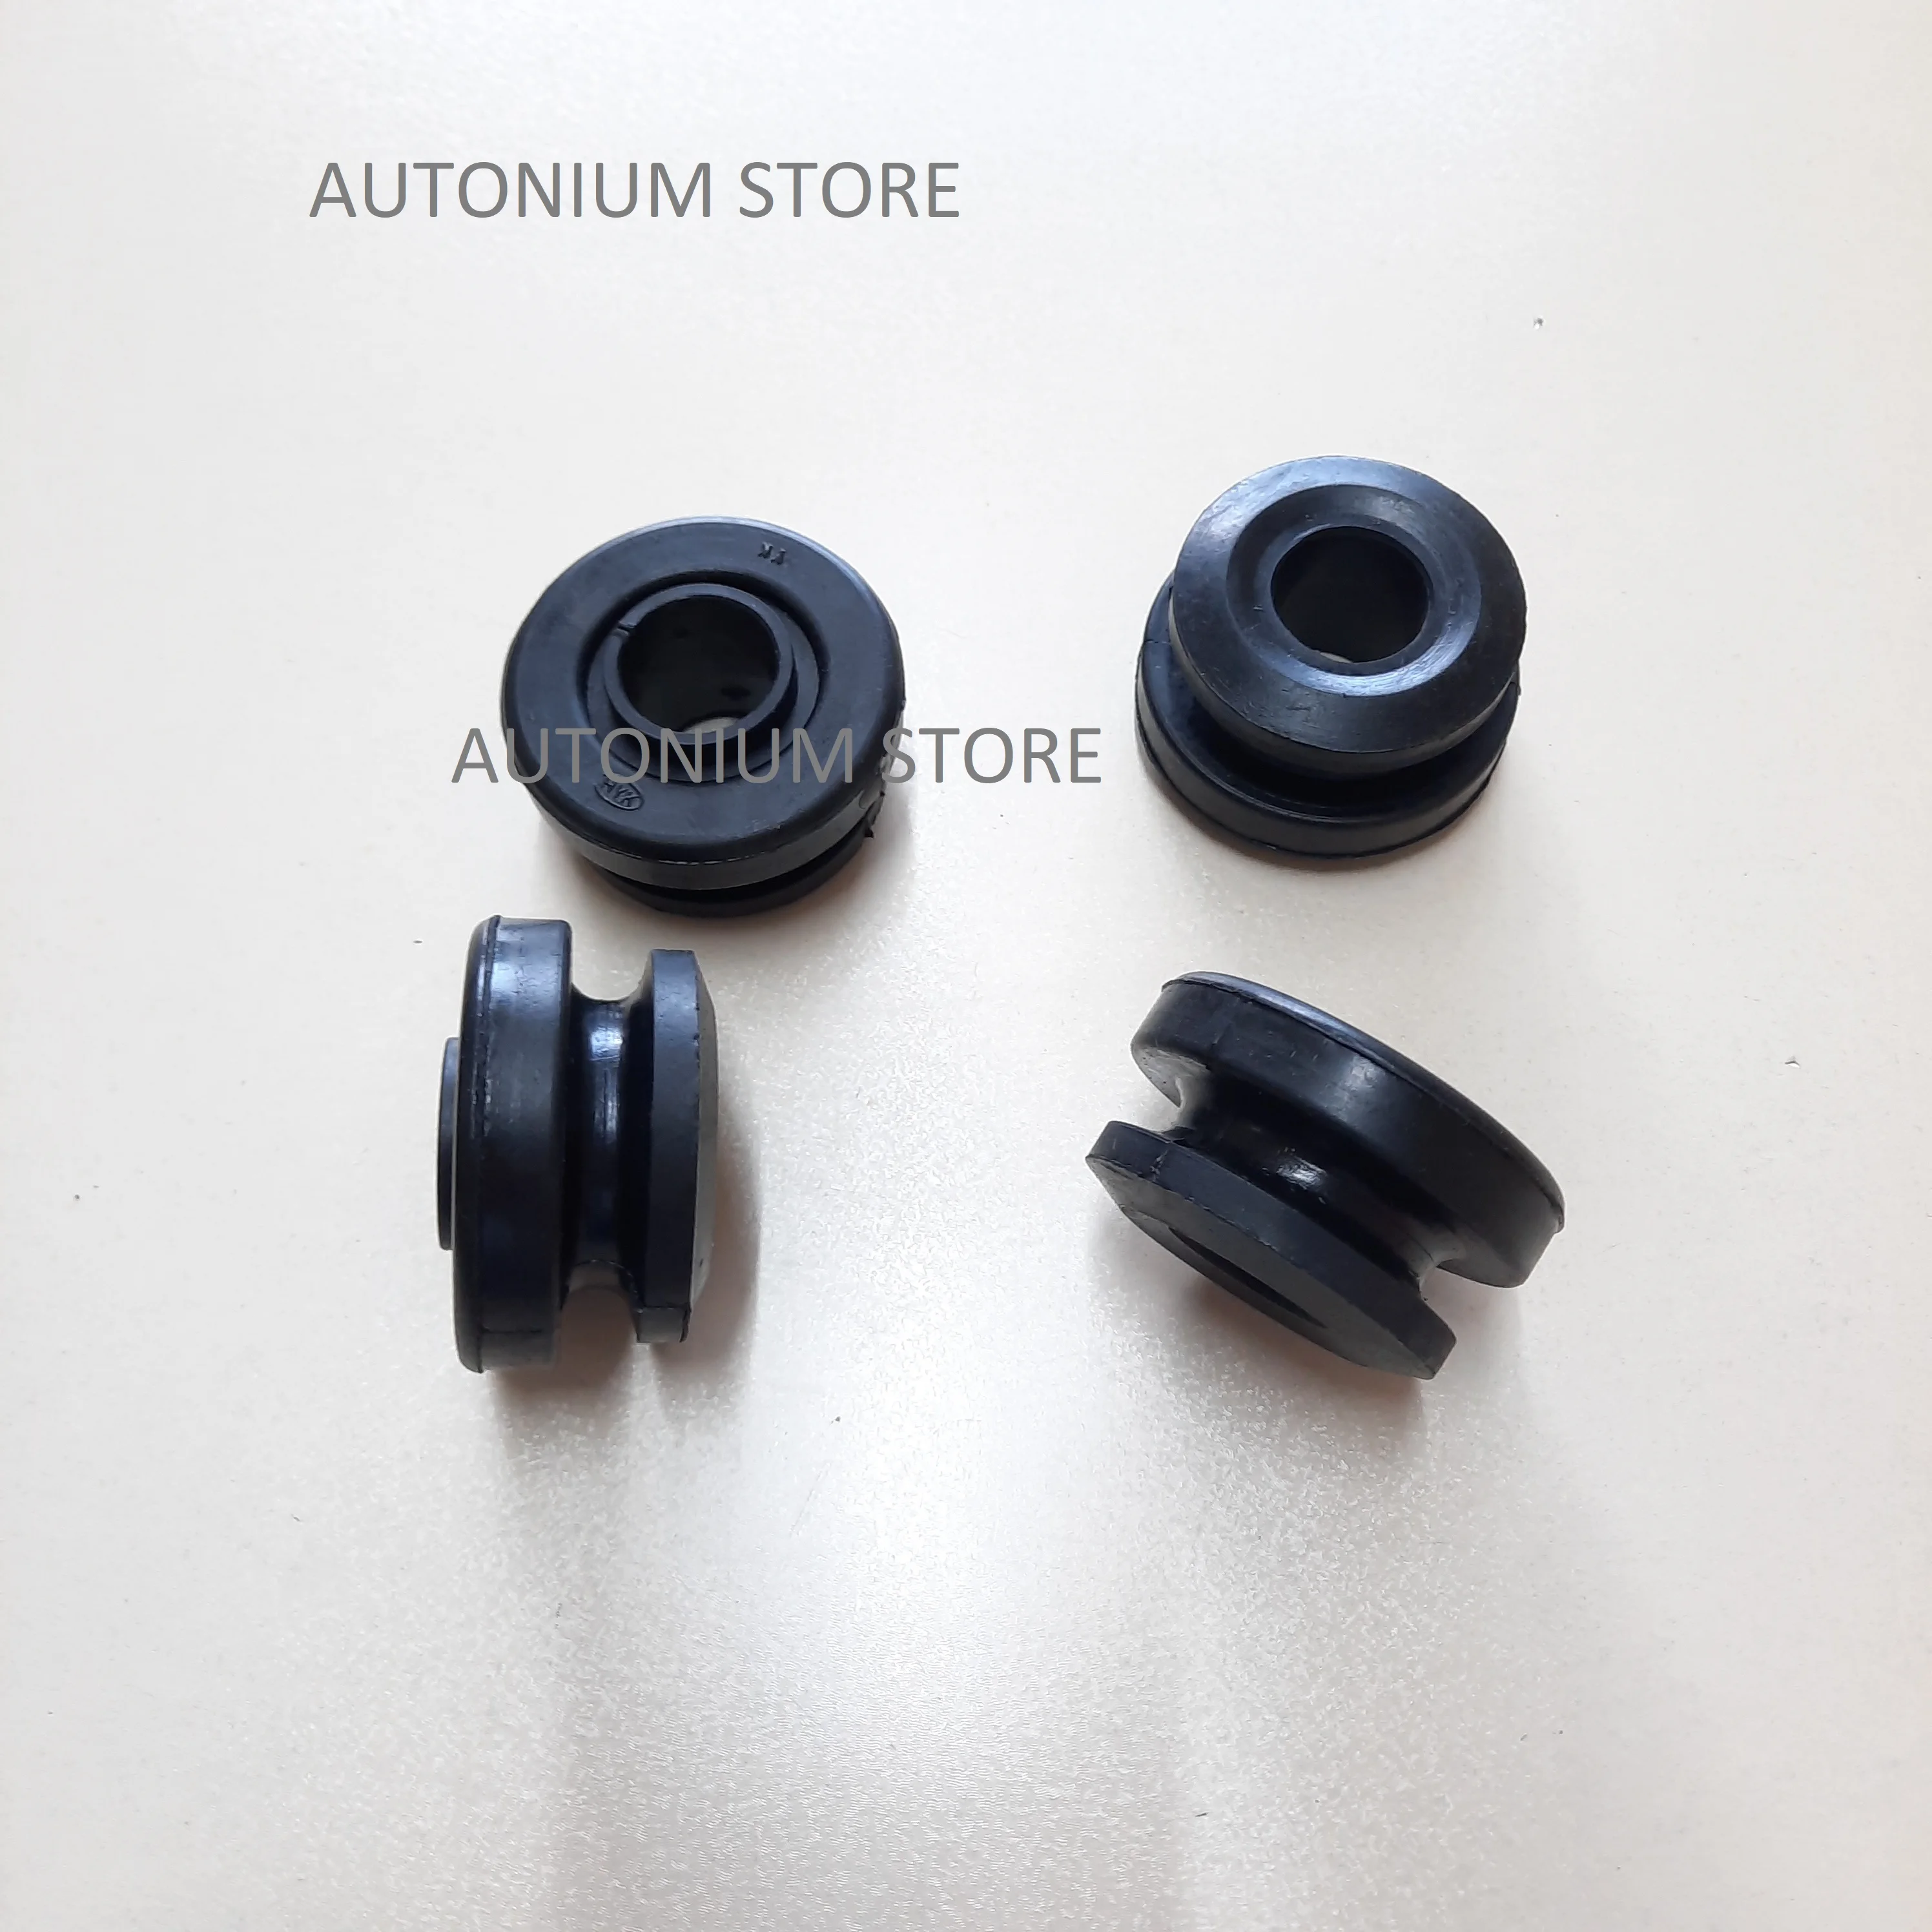 

Front Strut Rod Cushion Bushing 1 Set 4 Pieces for Mitsubishi L300 - Delica MR162680 (Best Quality Rubber)